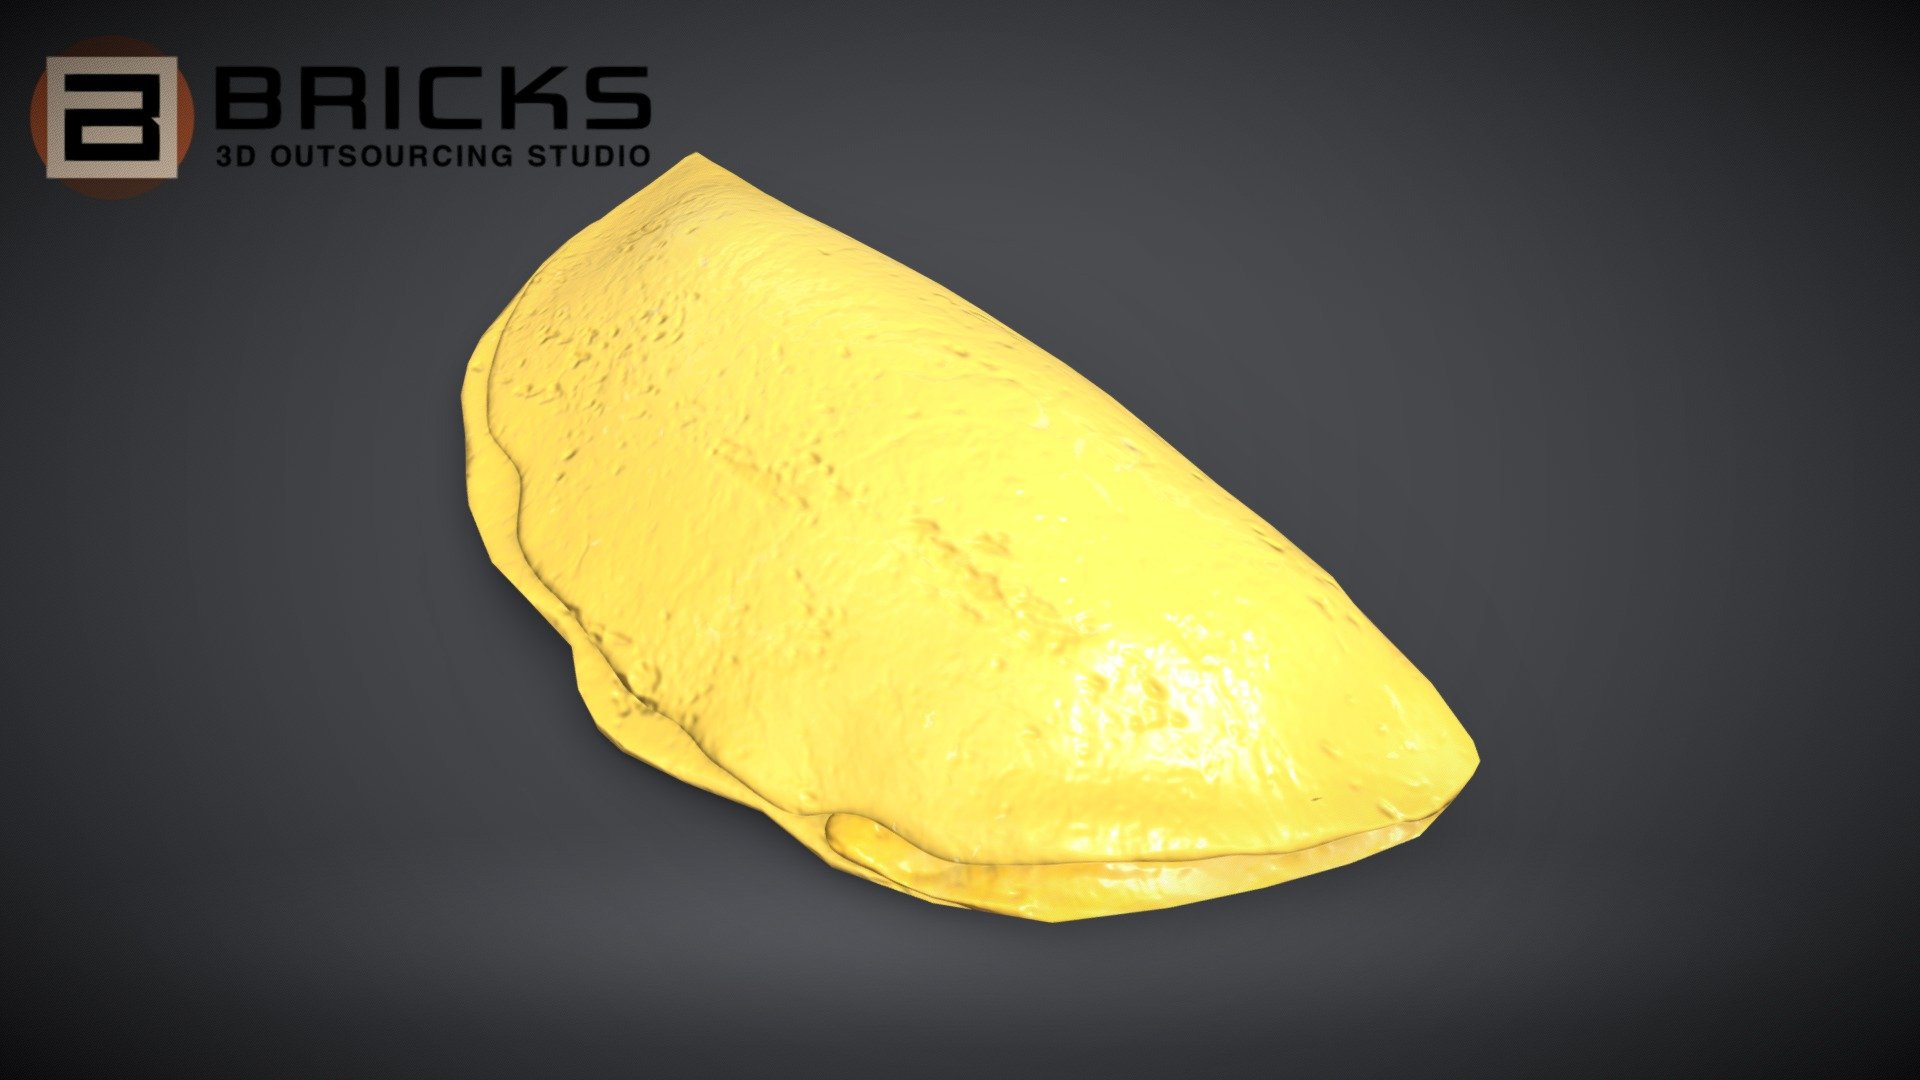 PBR Food Asset:
EggOmellet
Polycount: 1012
Vertex count: 508
Texture Size: 2048px x 2048px
Normal: OpenGL

If you need any adjust in file please contact us: team@bricks3dstudio.com

Hire us: tringuyen@bricks3dstudio.com
Here is us: https://www.bricks3dstudio.com/
        https://www.artstation.com/bricksstudio
        https://www.facebook.com/Bricks3dstudio/
        https://www.linkedin.com/in/bricks-studio-b10462252/ - EggOmellet - Buy Royalty Free 3D model by Bricks Studio (@bricks3dstudio) 3d model